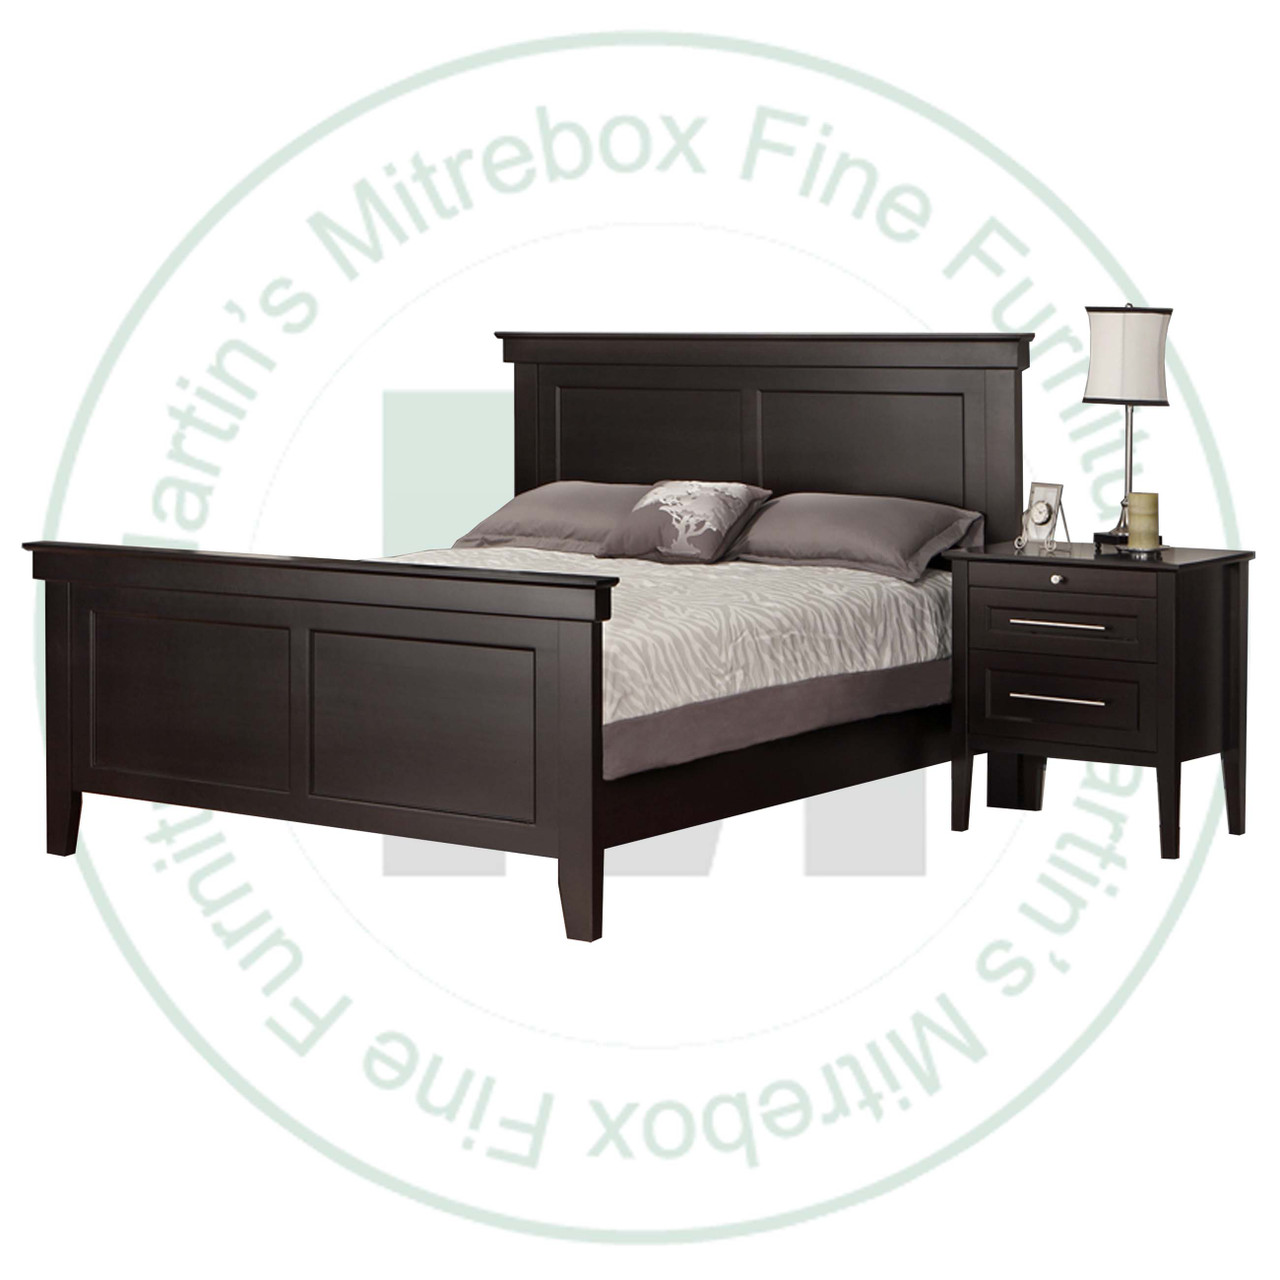 Maple Stockholm Double Panel Bed